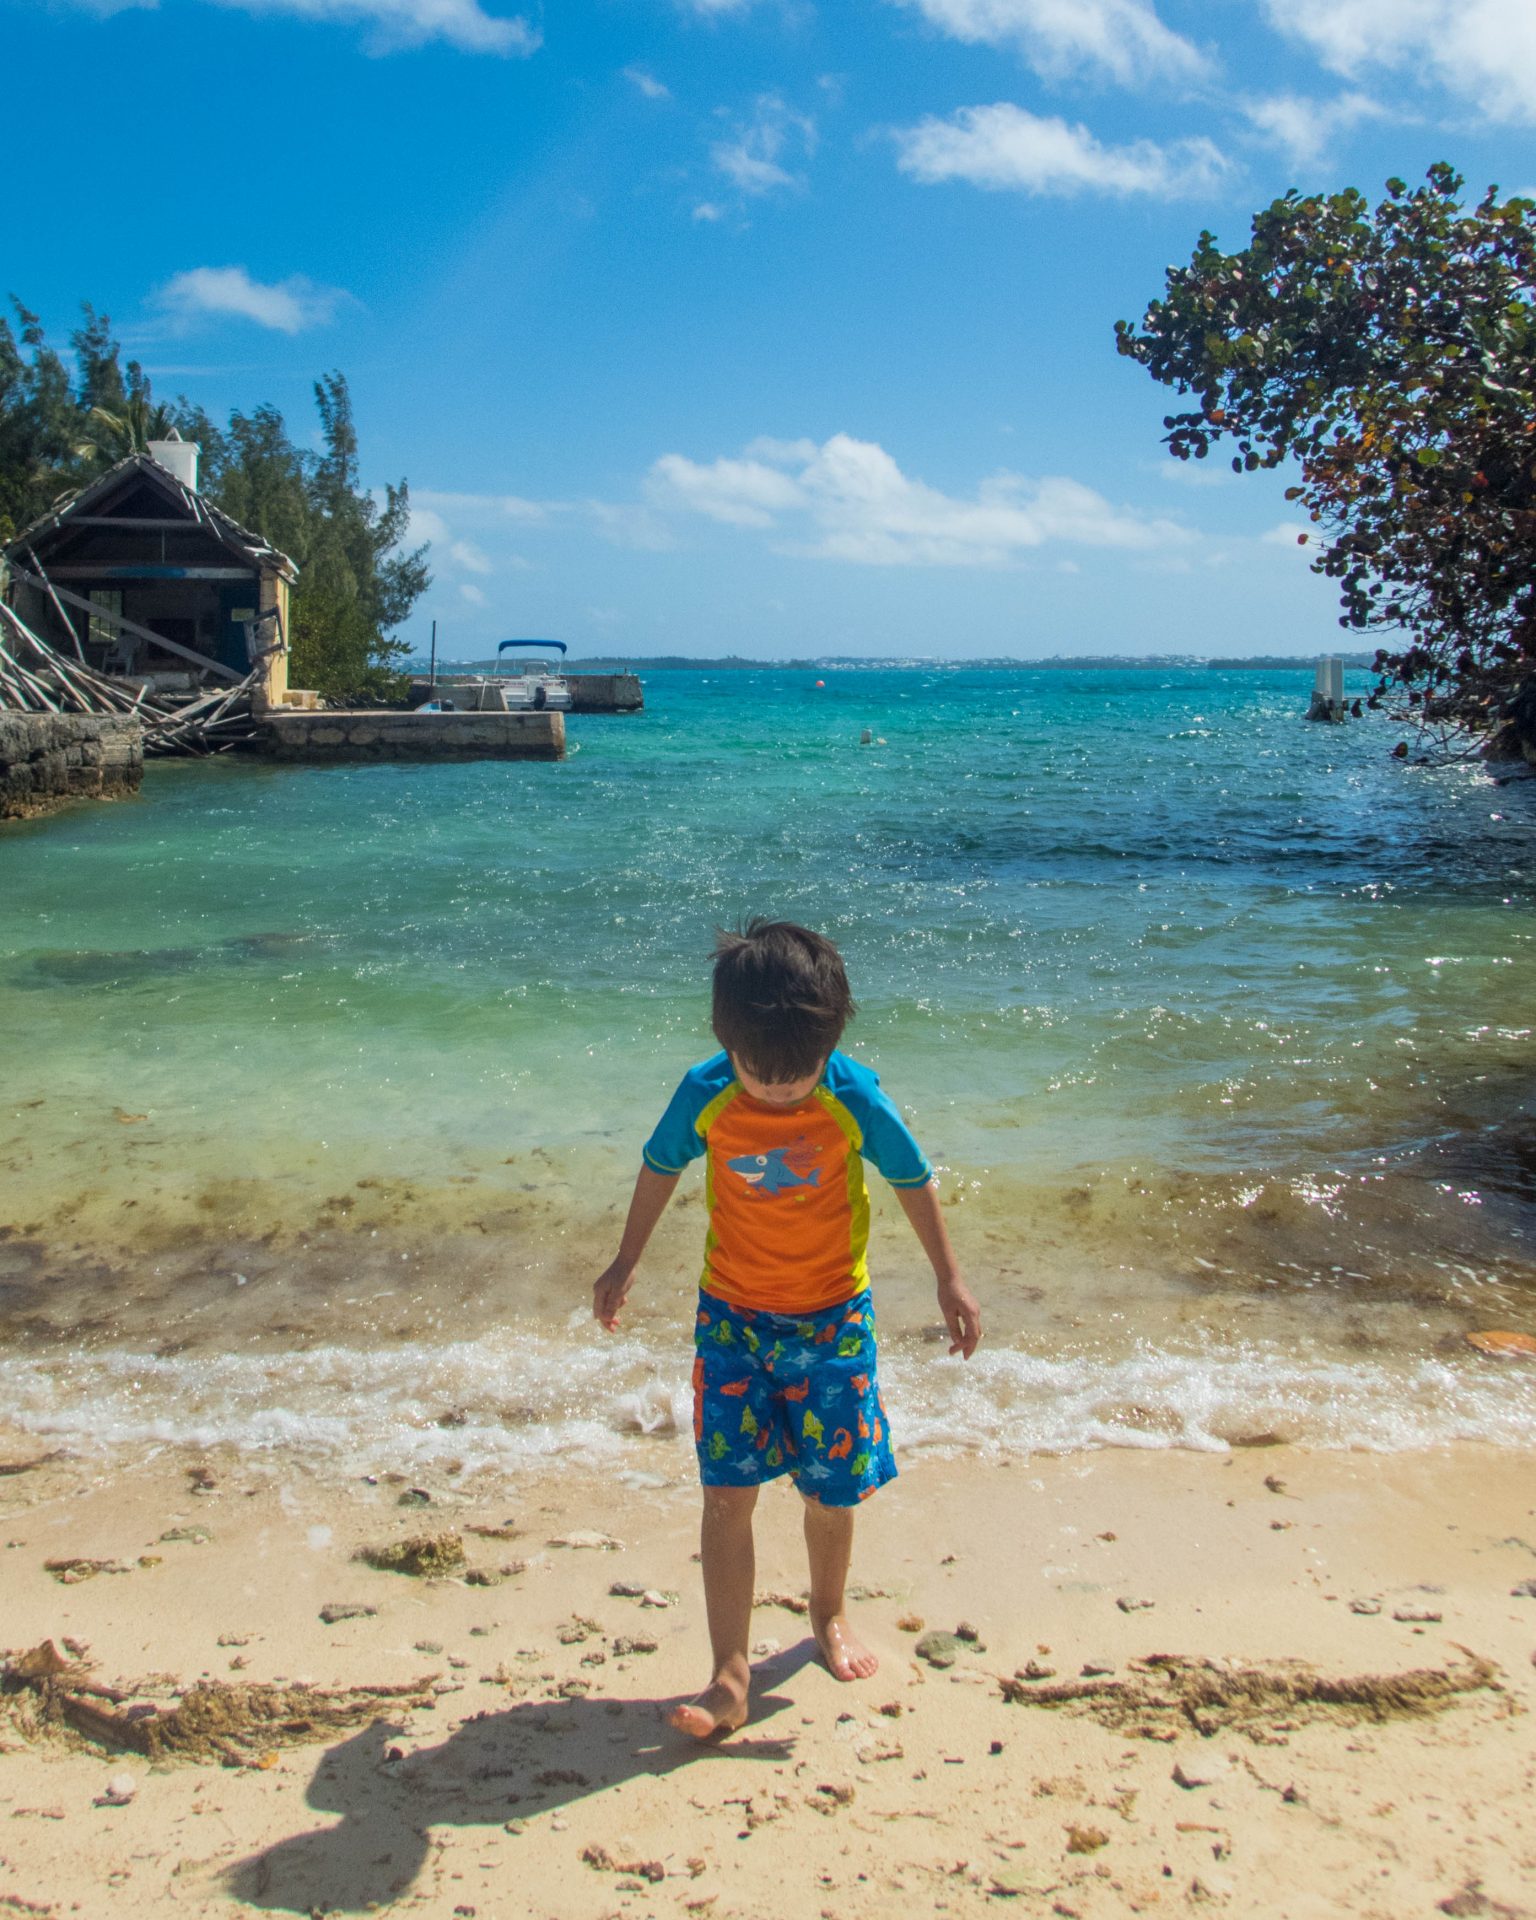 A young boy in swim gear walks out of the waves of a small cove in Bermuda - Boating in Bermuda